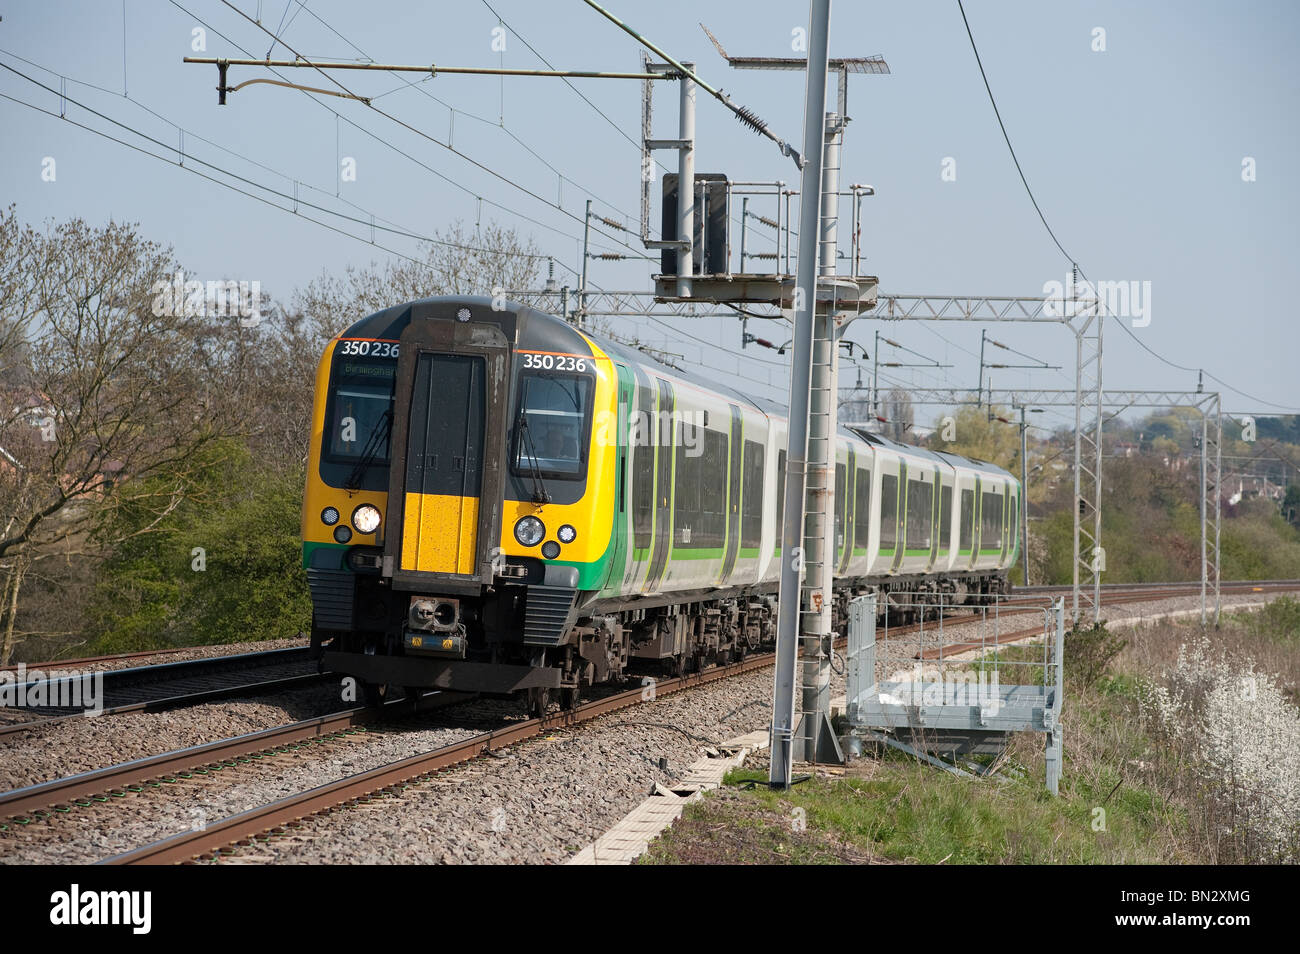 London Midland trains passenger train class 350 travelling at speed through the english countryside. Stock Photo